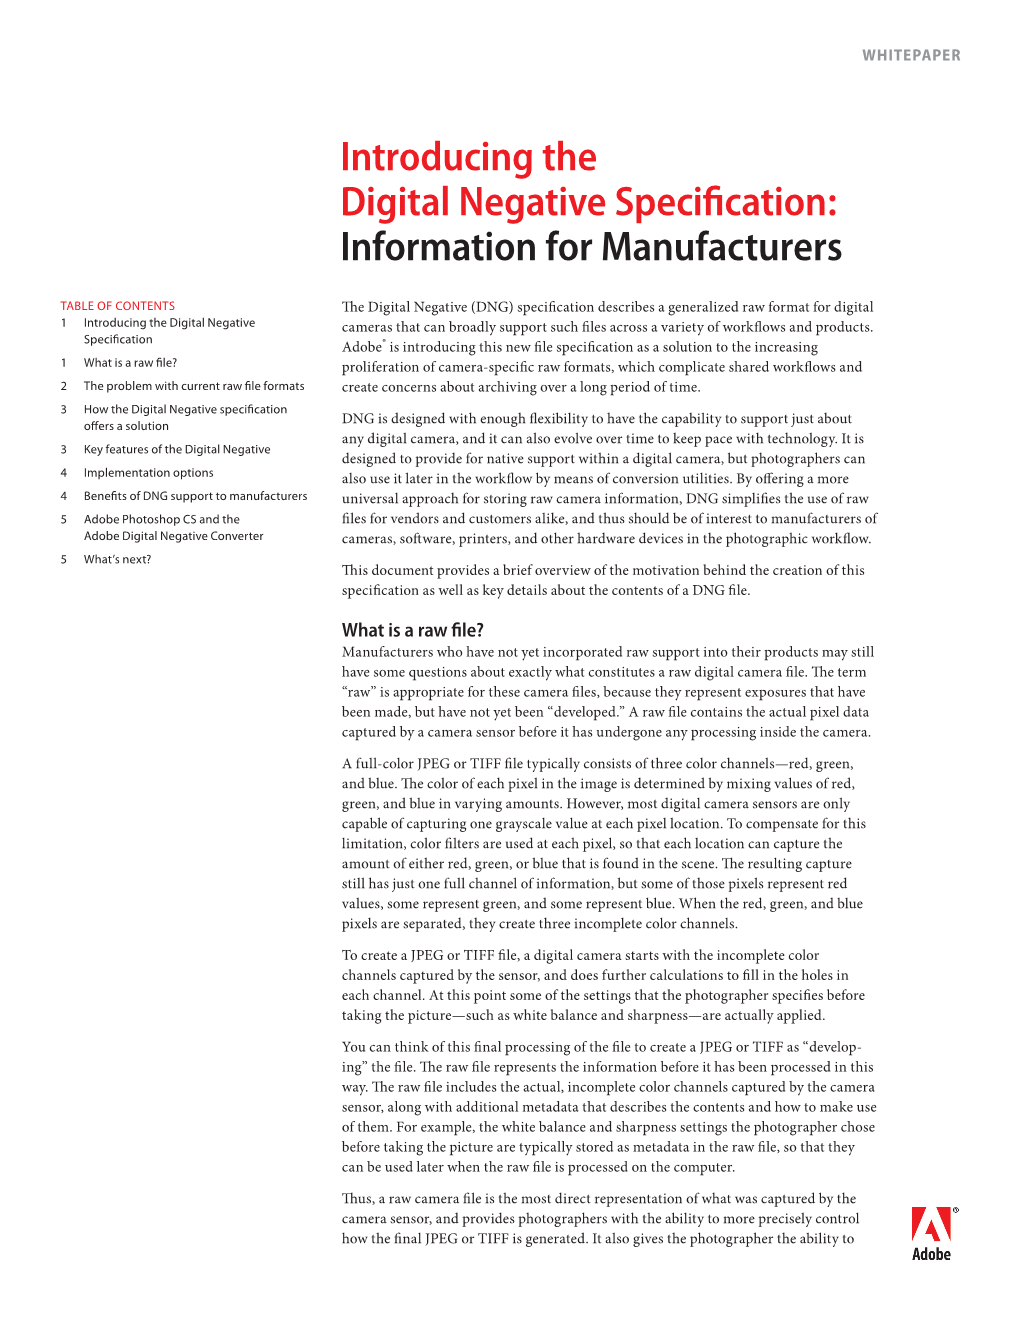 Introducing the Digital Negative Specification: Information For